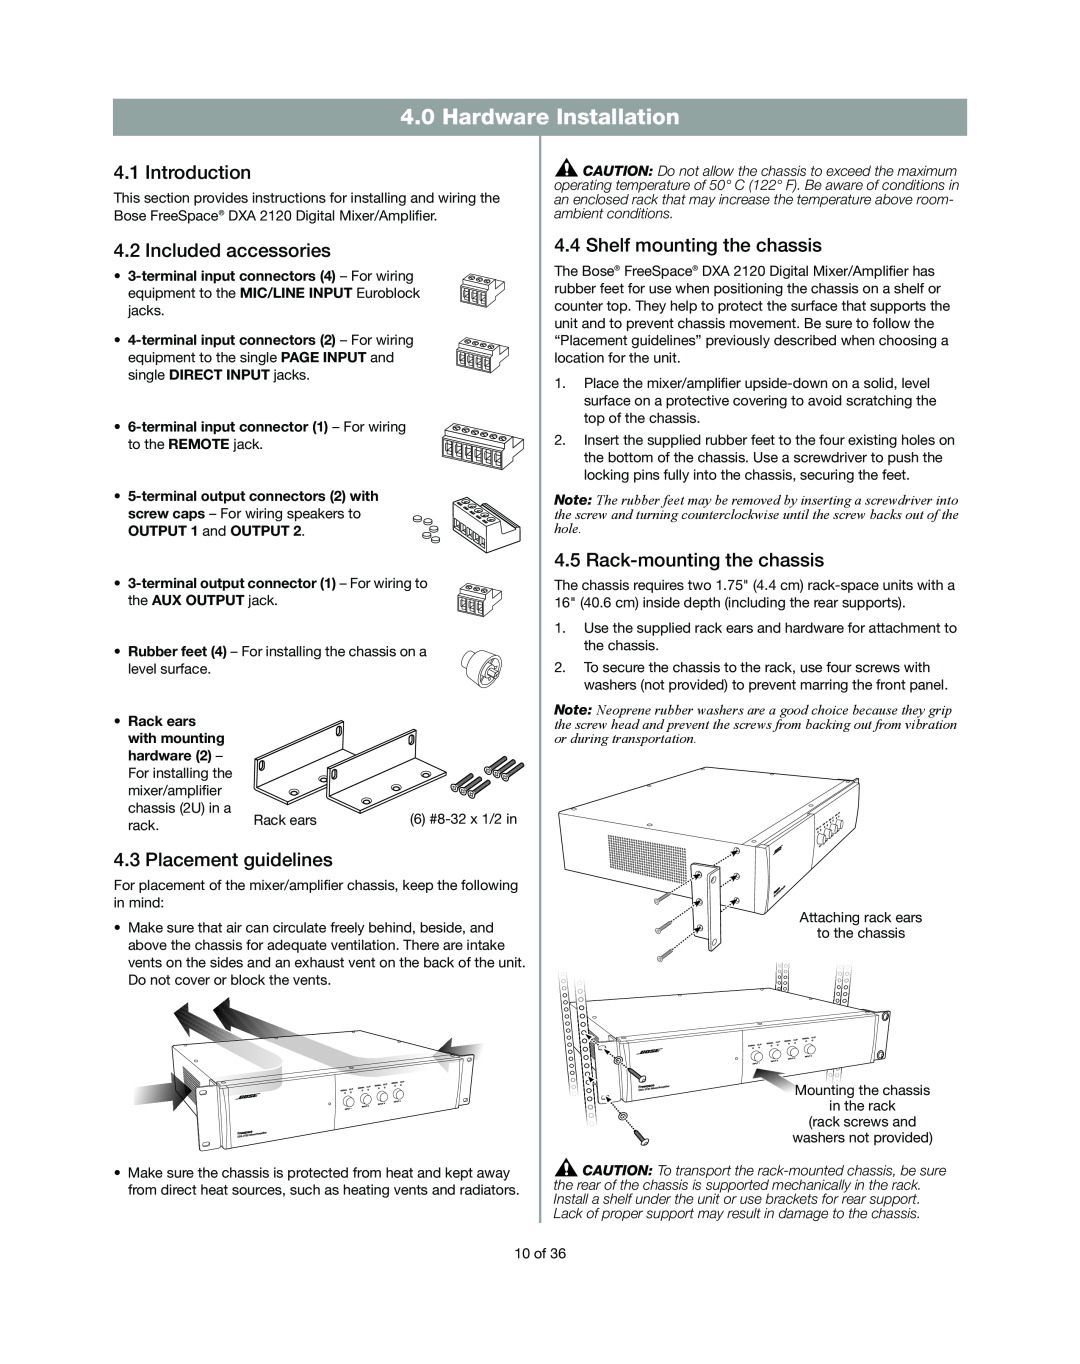 Bose DXA2120 Hardware Installation, Introduction, Included accessories, Placement guidelines, Shelf mounting the chassis 